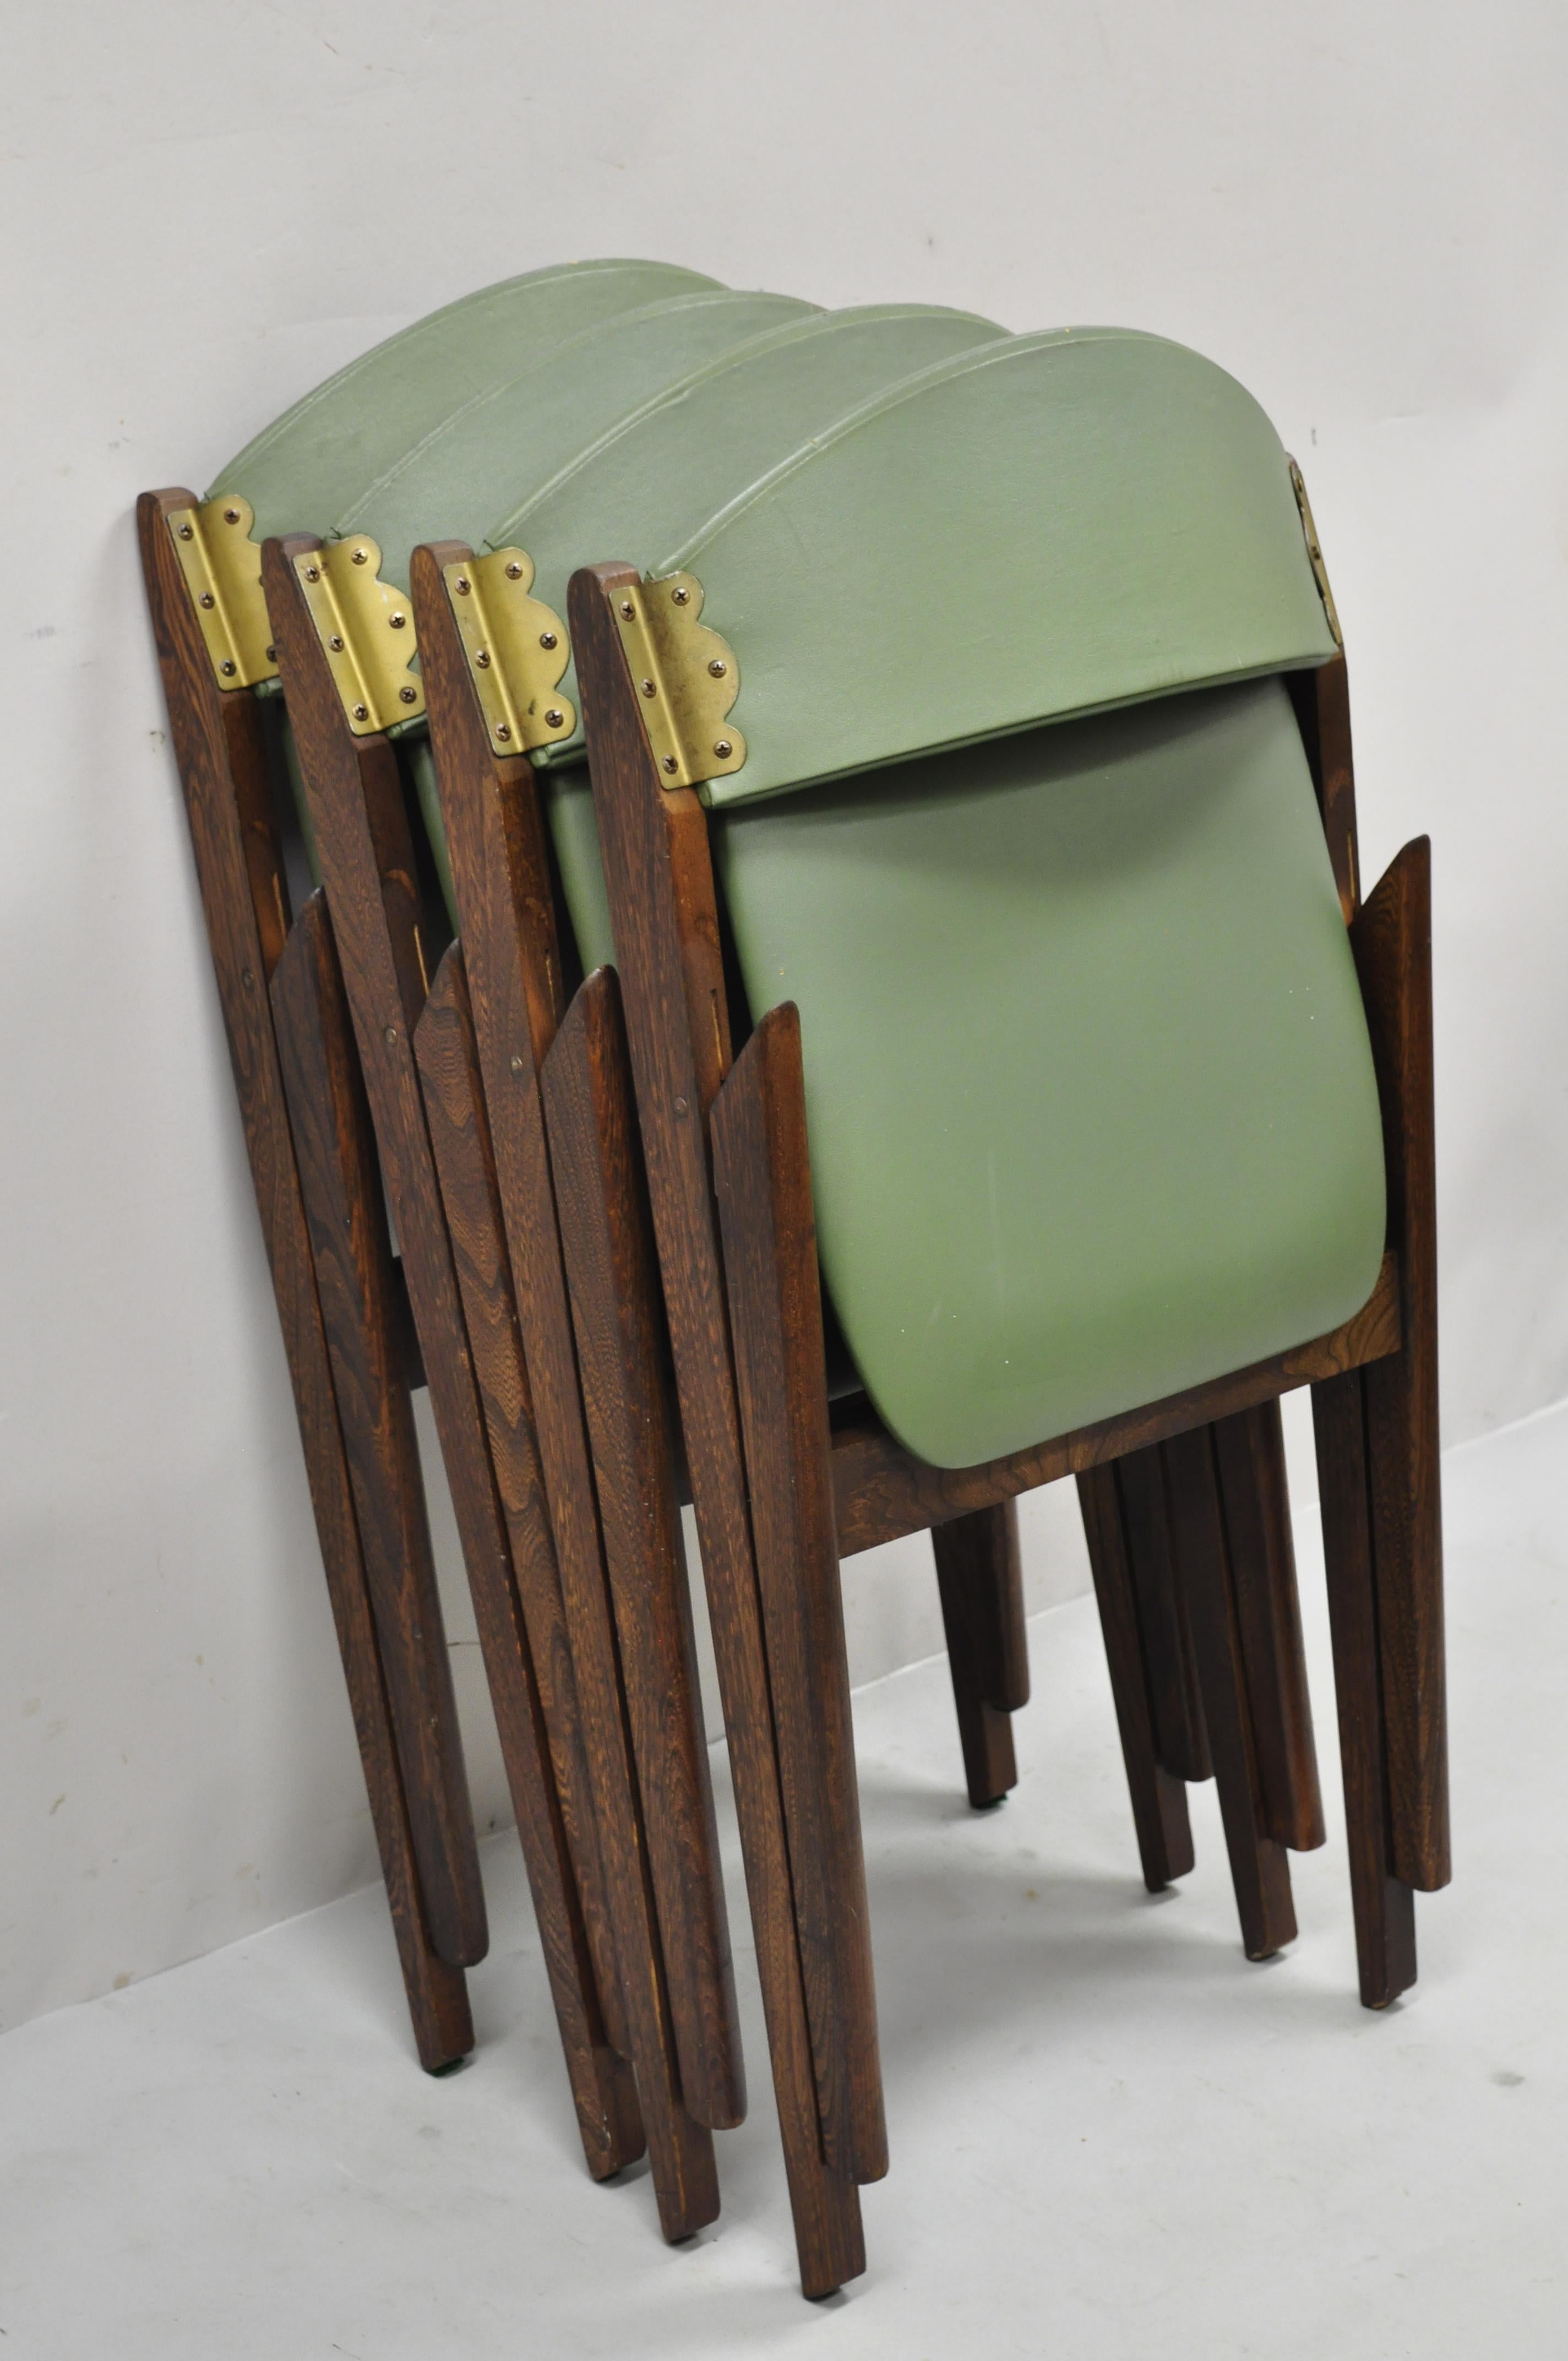 stakmore folding chairs 1950